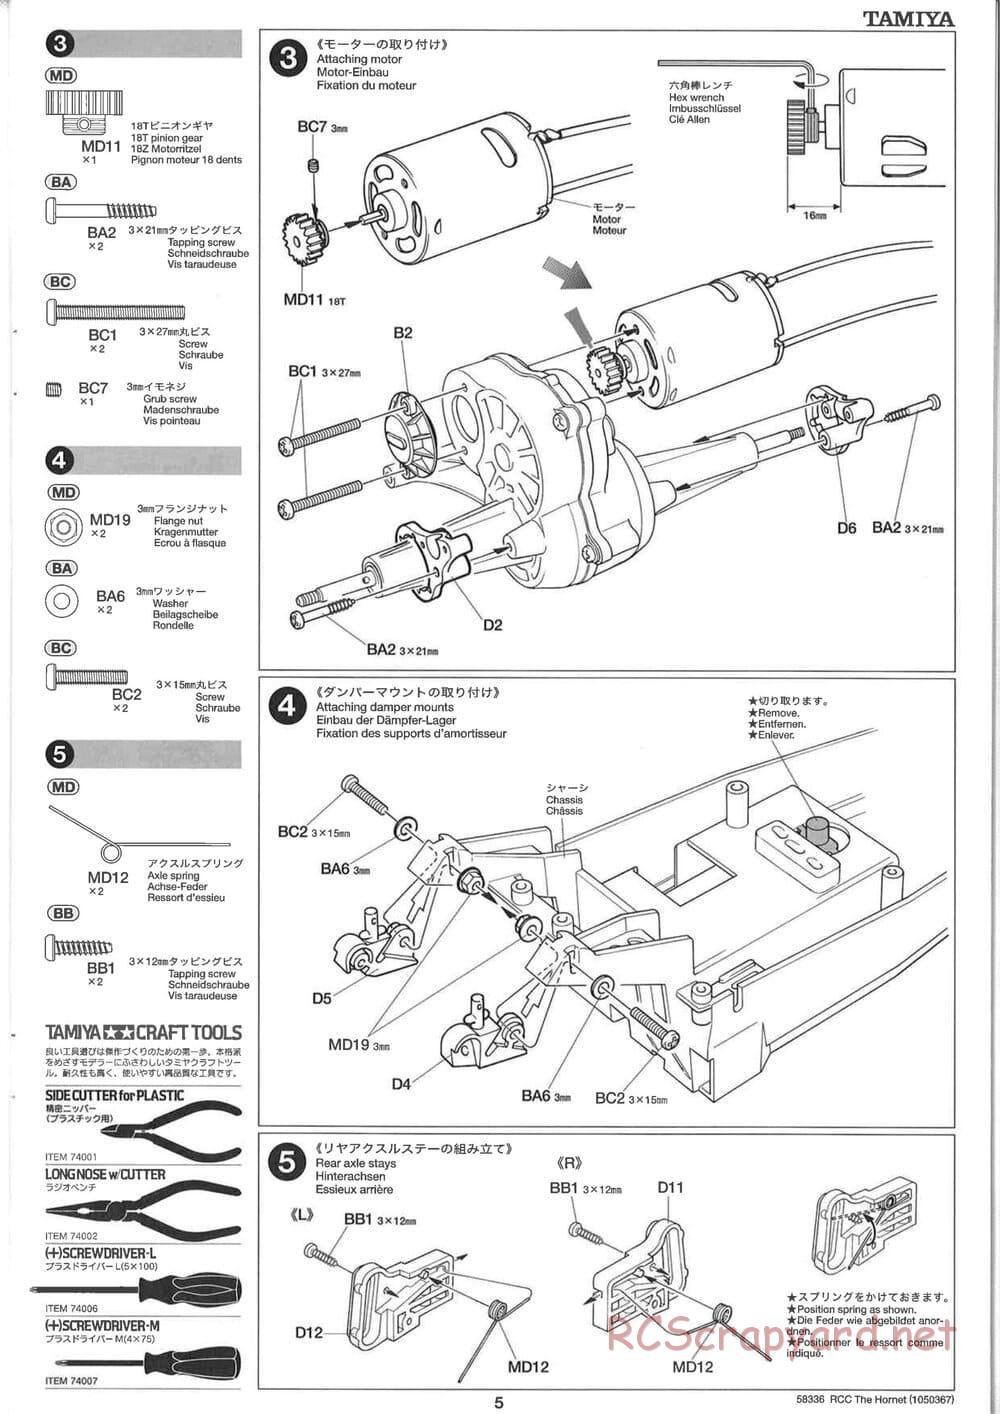 Tamiya - The Hornet (2004) - GH Chassis - Manual - Page 5